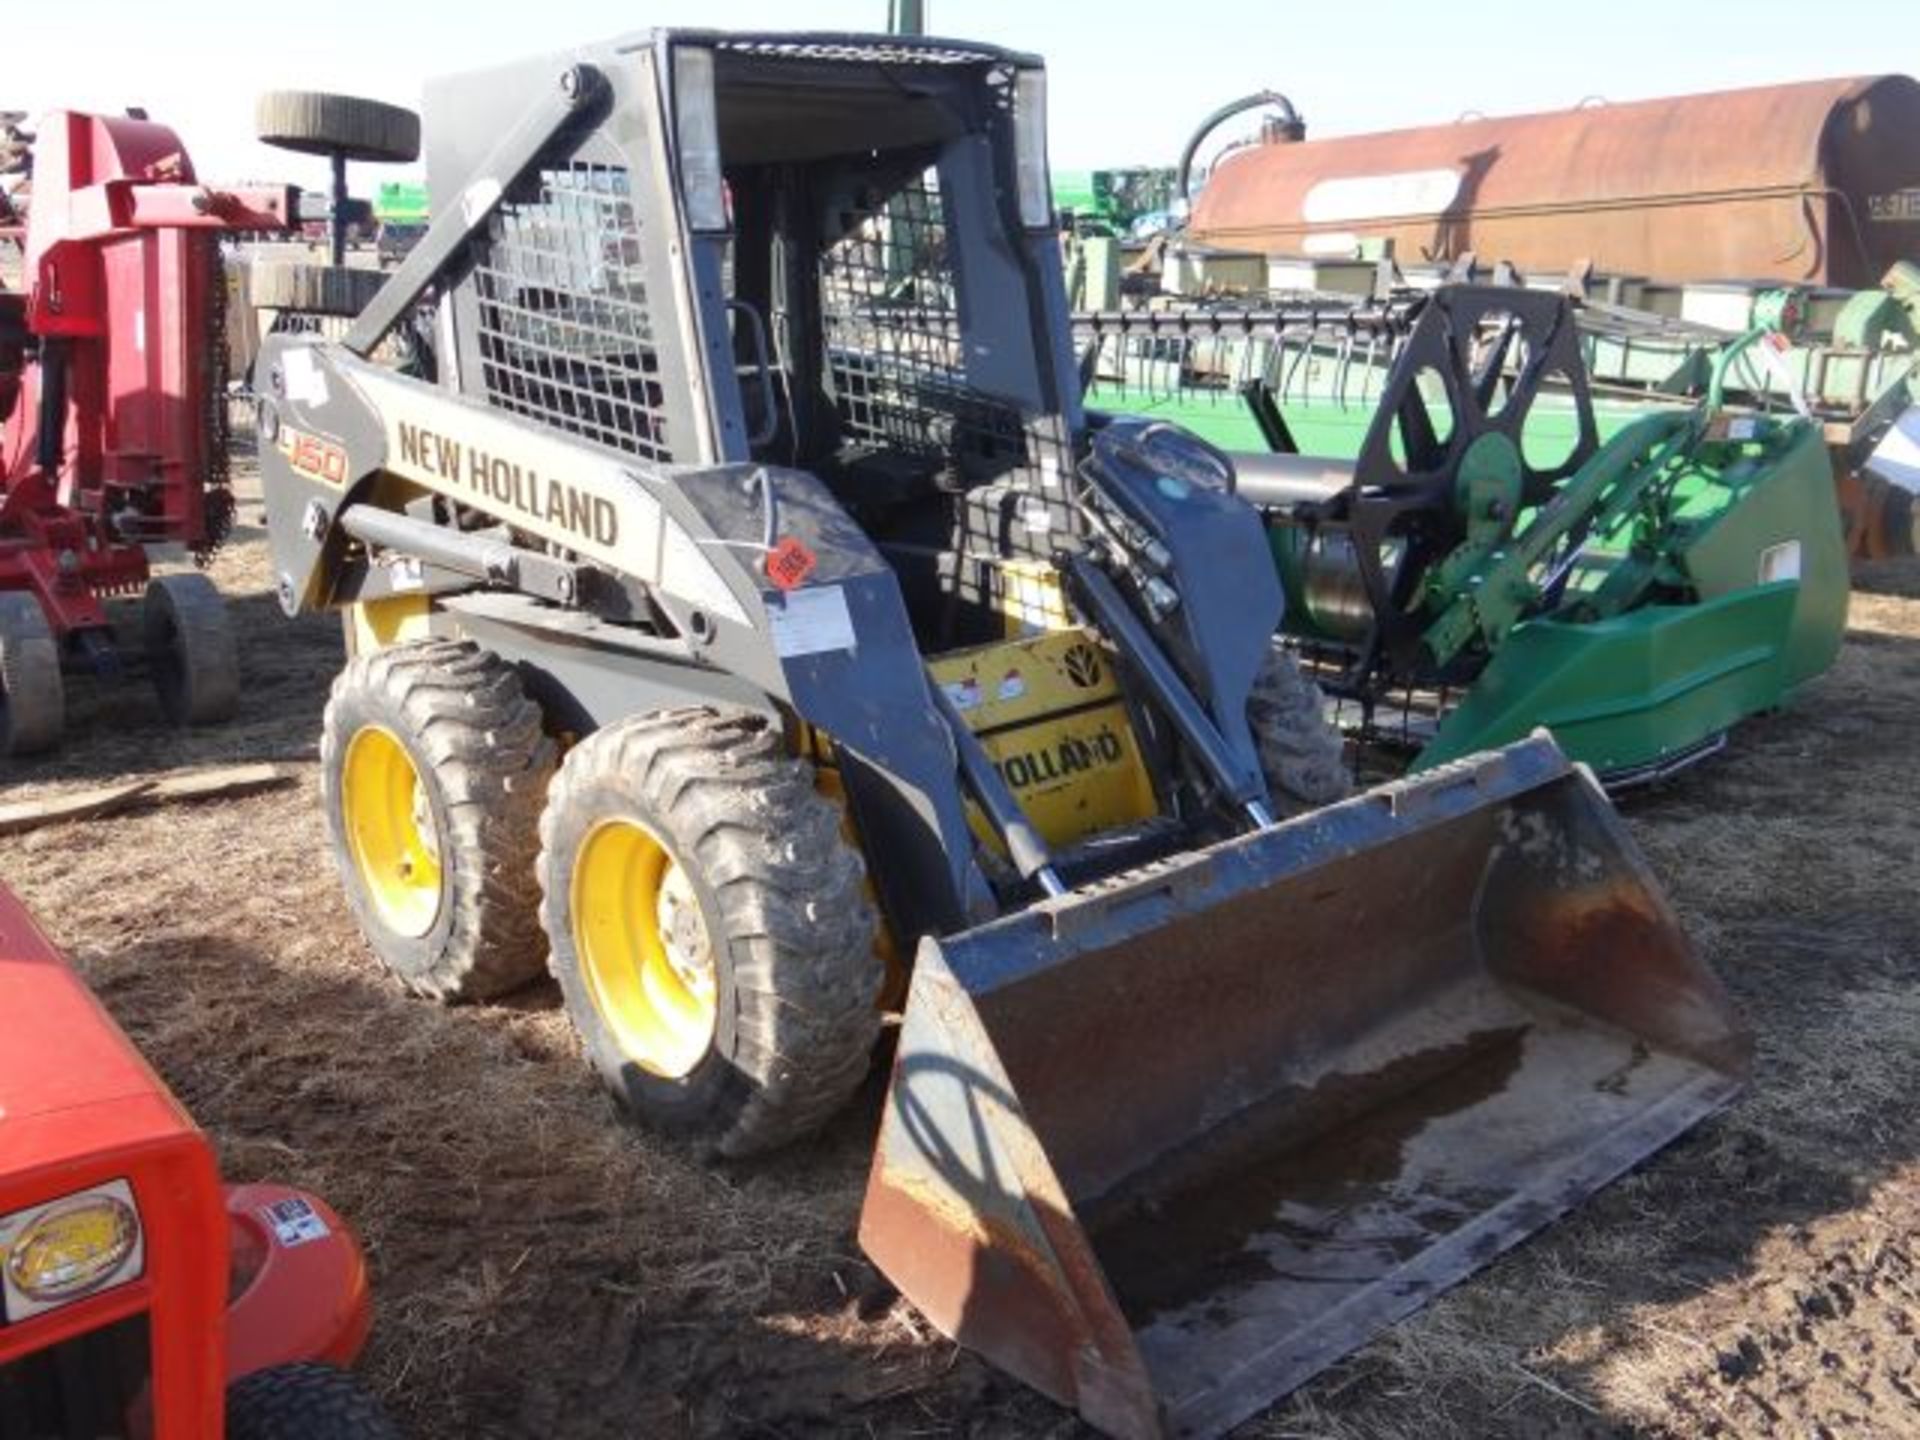 NH L150 Skid Loader, 2008 200 hrs, All New Oil & Filters, Excellent Condition, Aux Hyd, Good Tires - Image 5 of 5